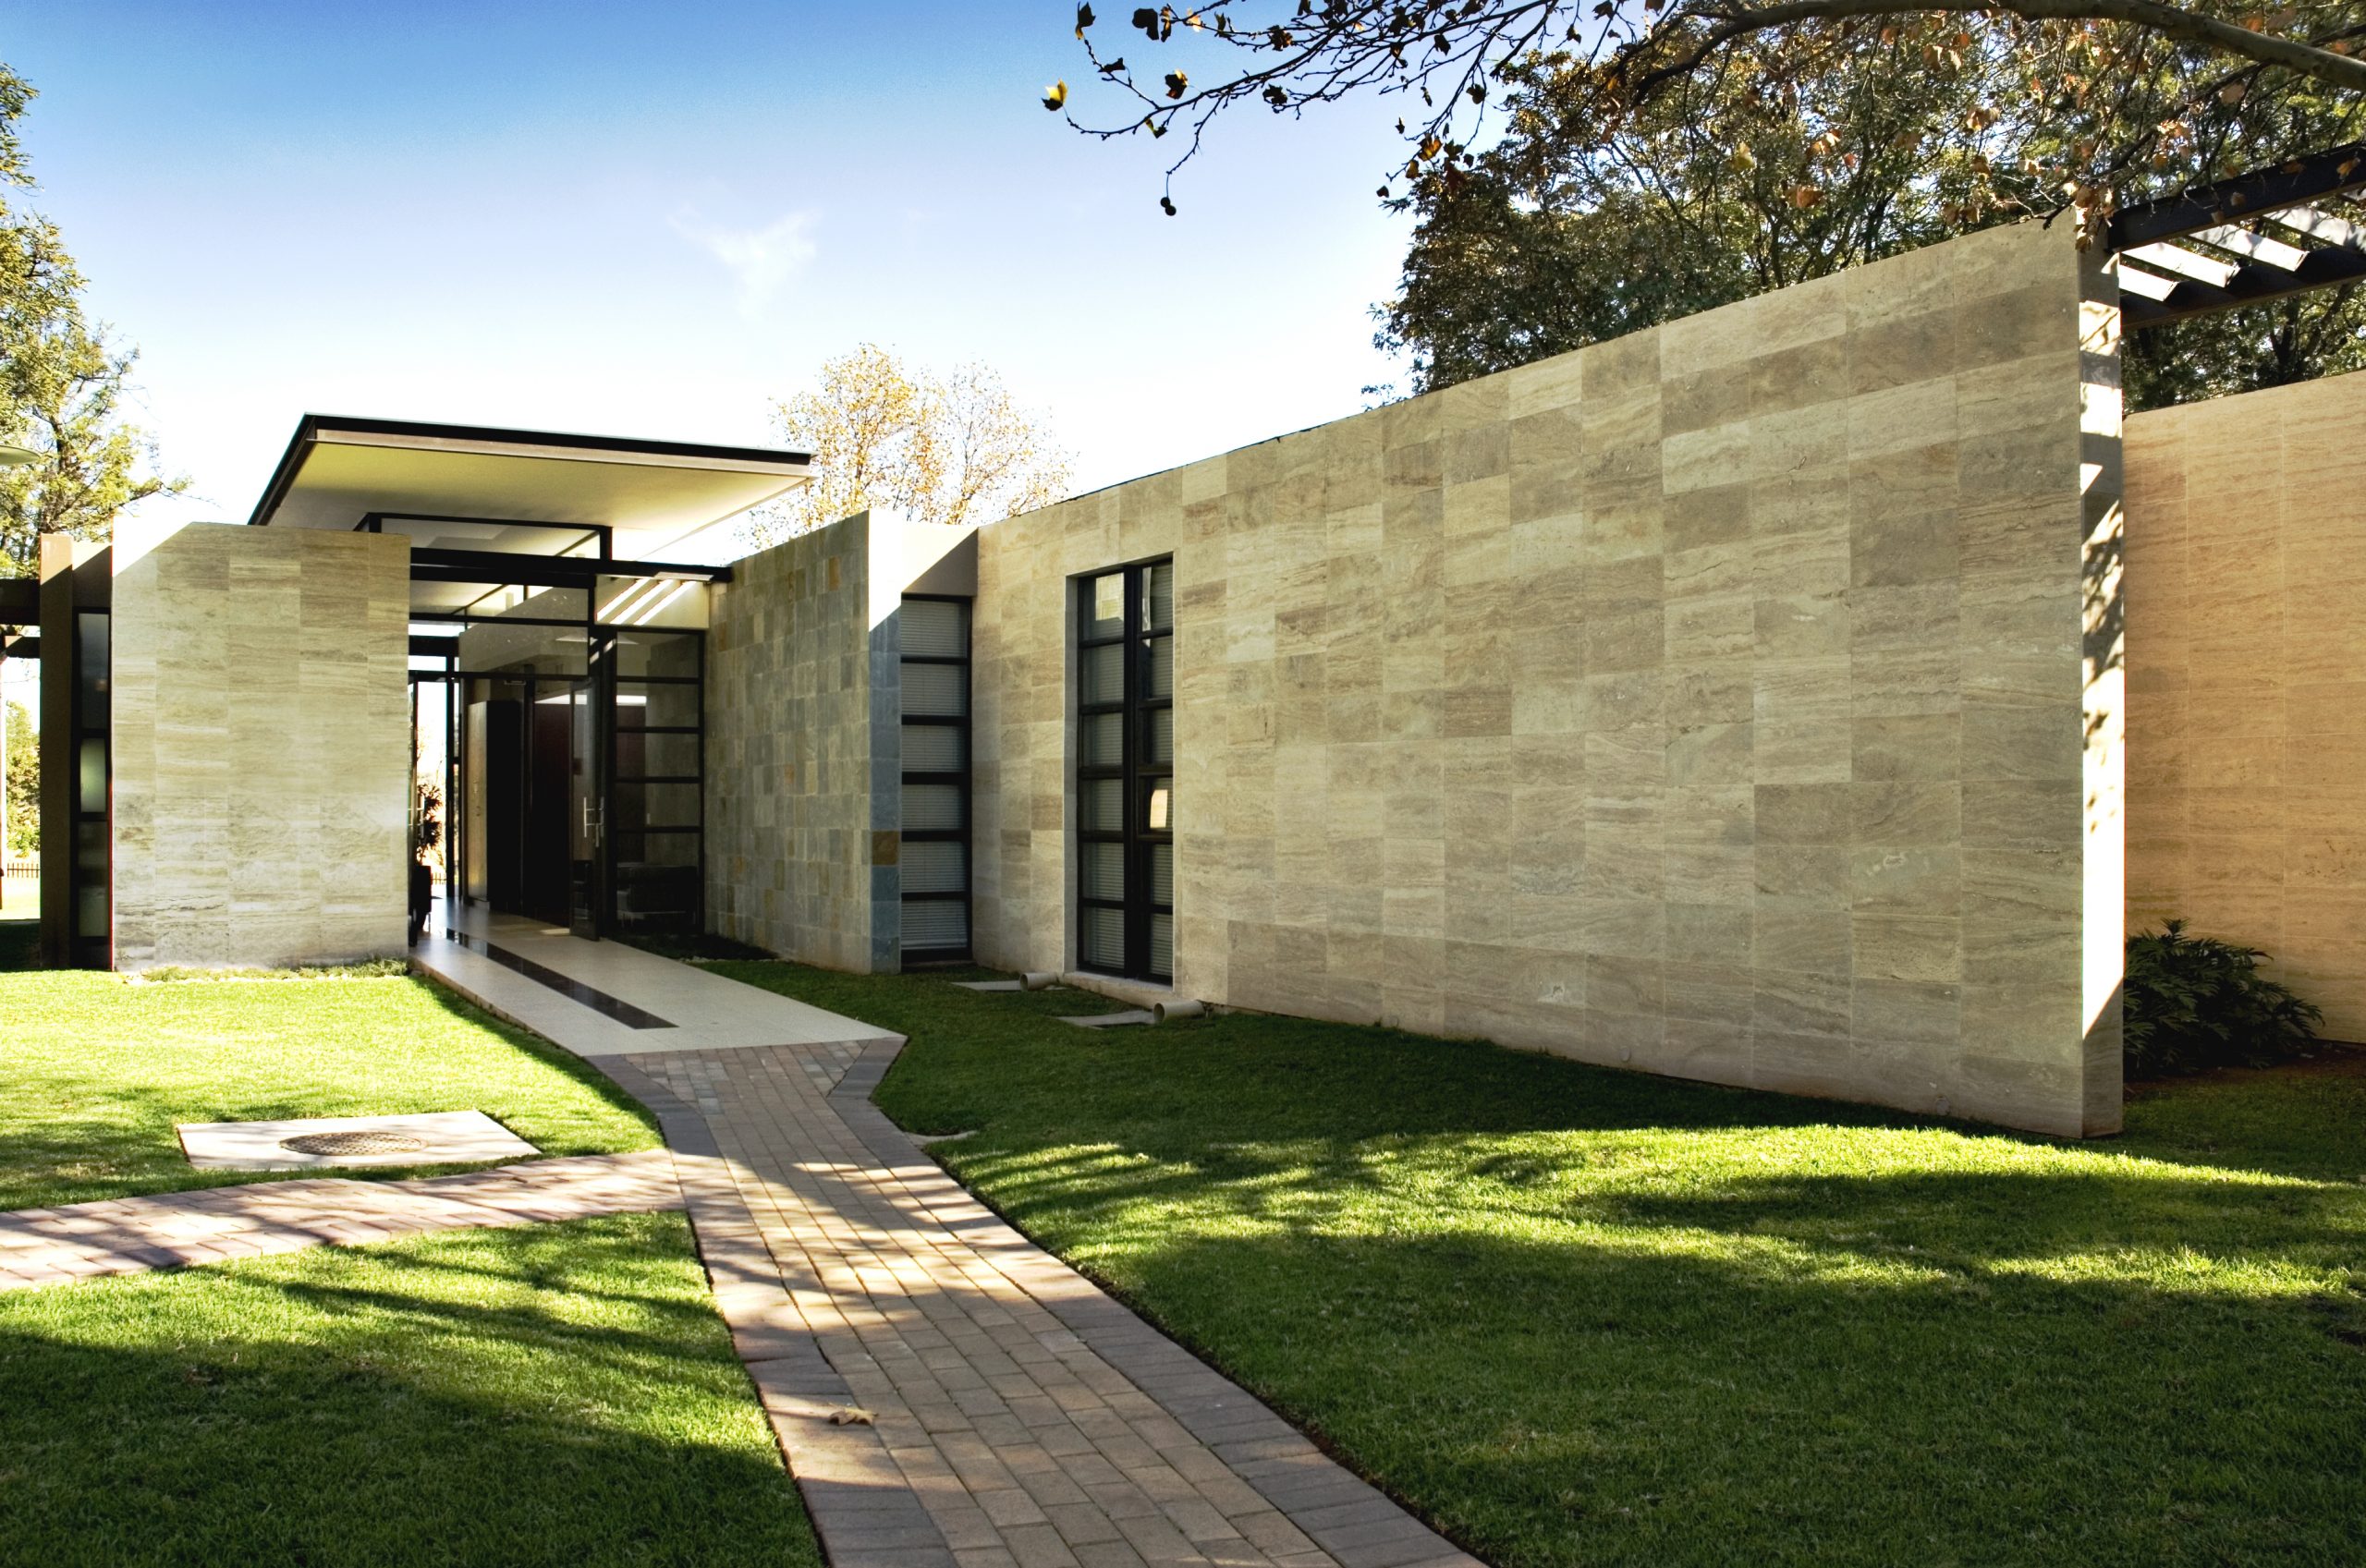 Terra Ether Architects designed Statistics South Africa